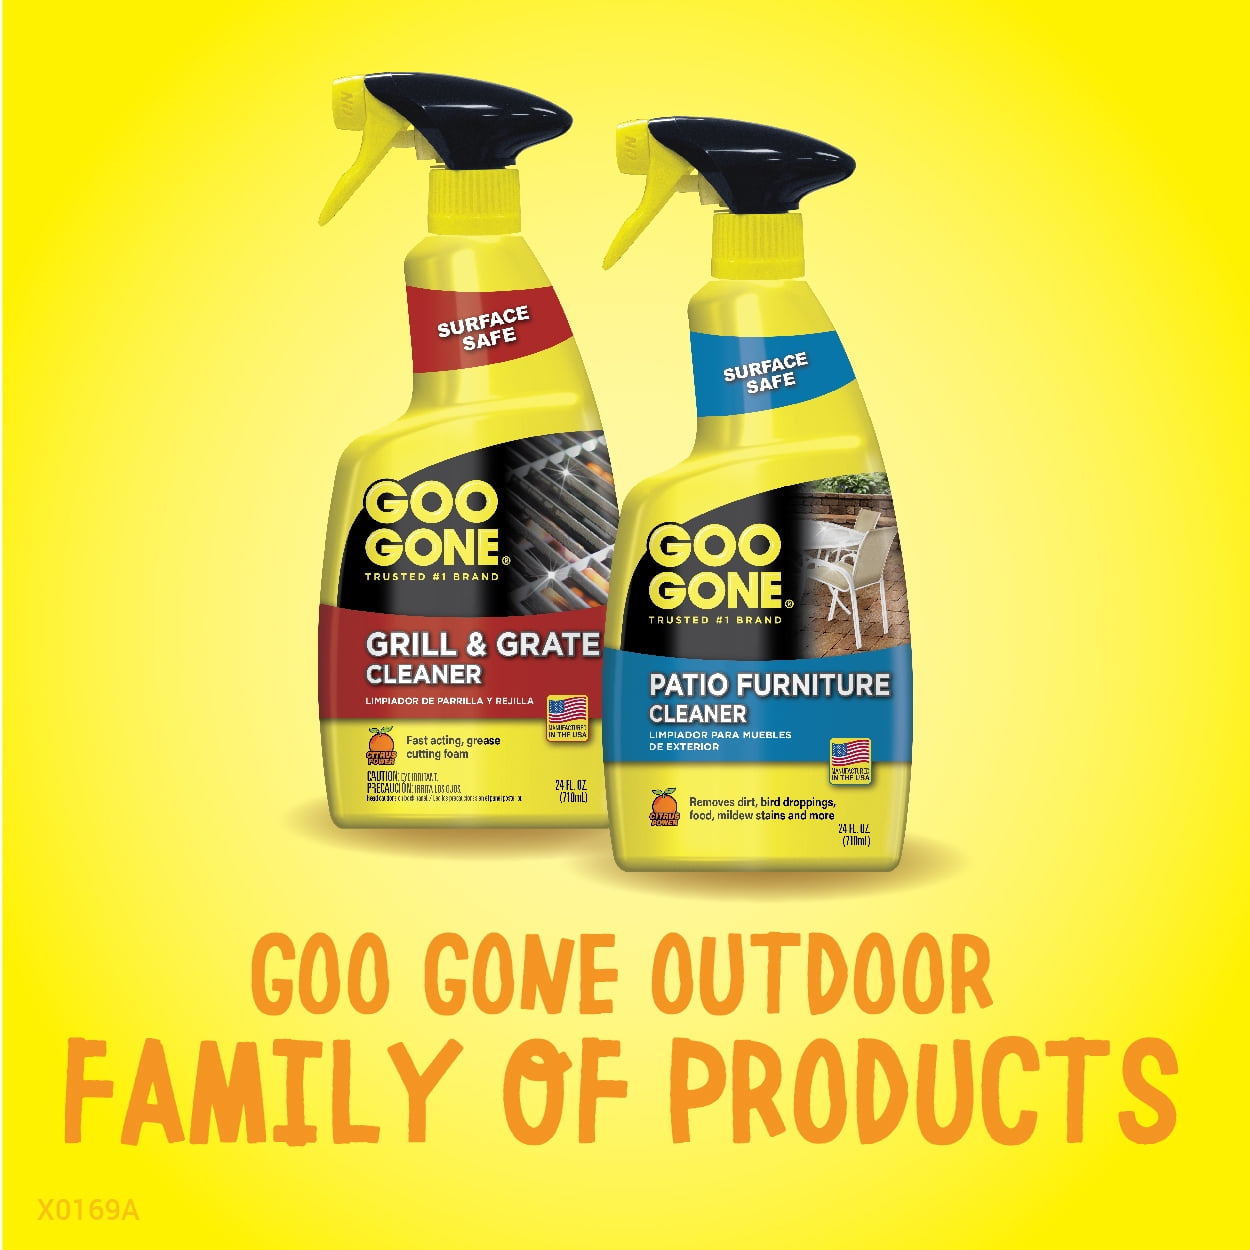 Goo Gone Outdoor Stainless Steel Grill Cleaner, 12oz